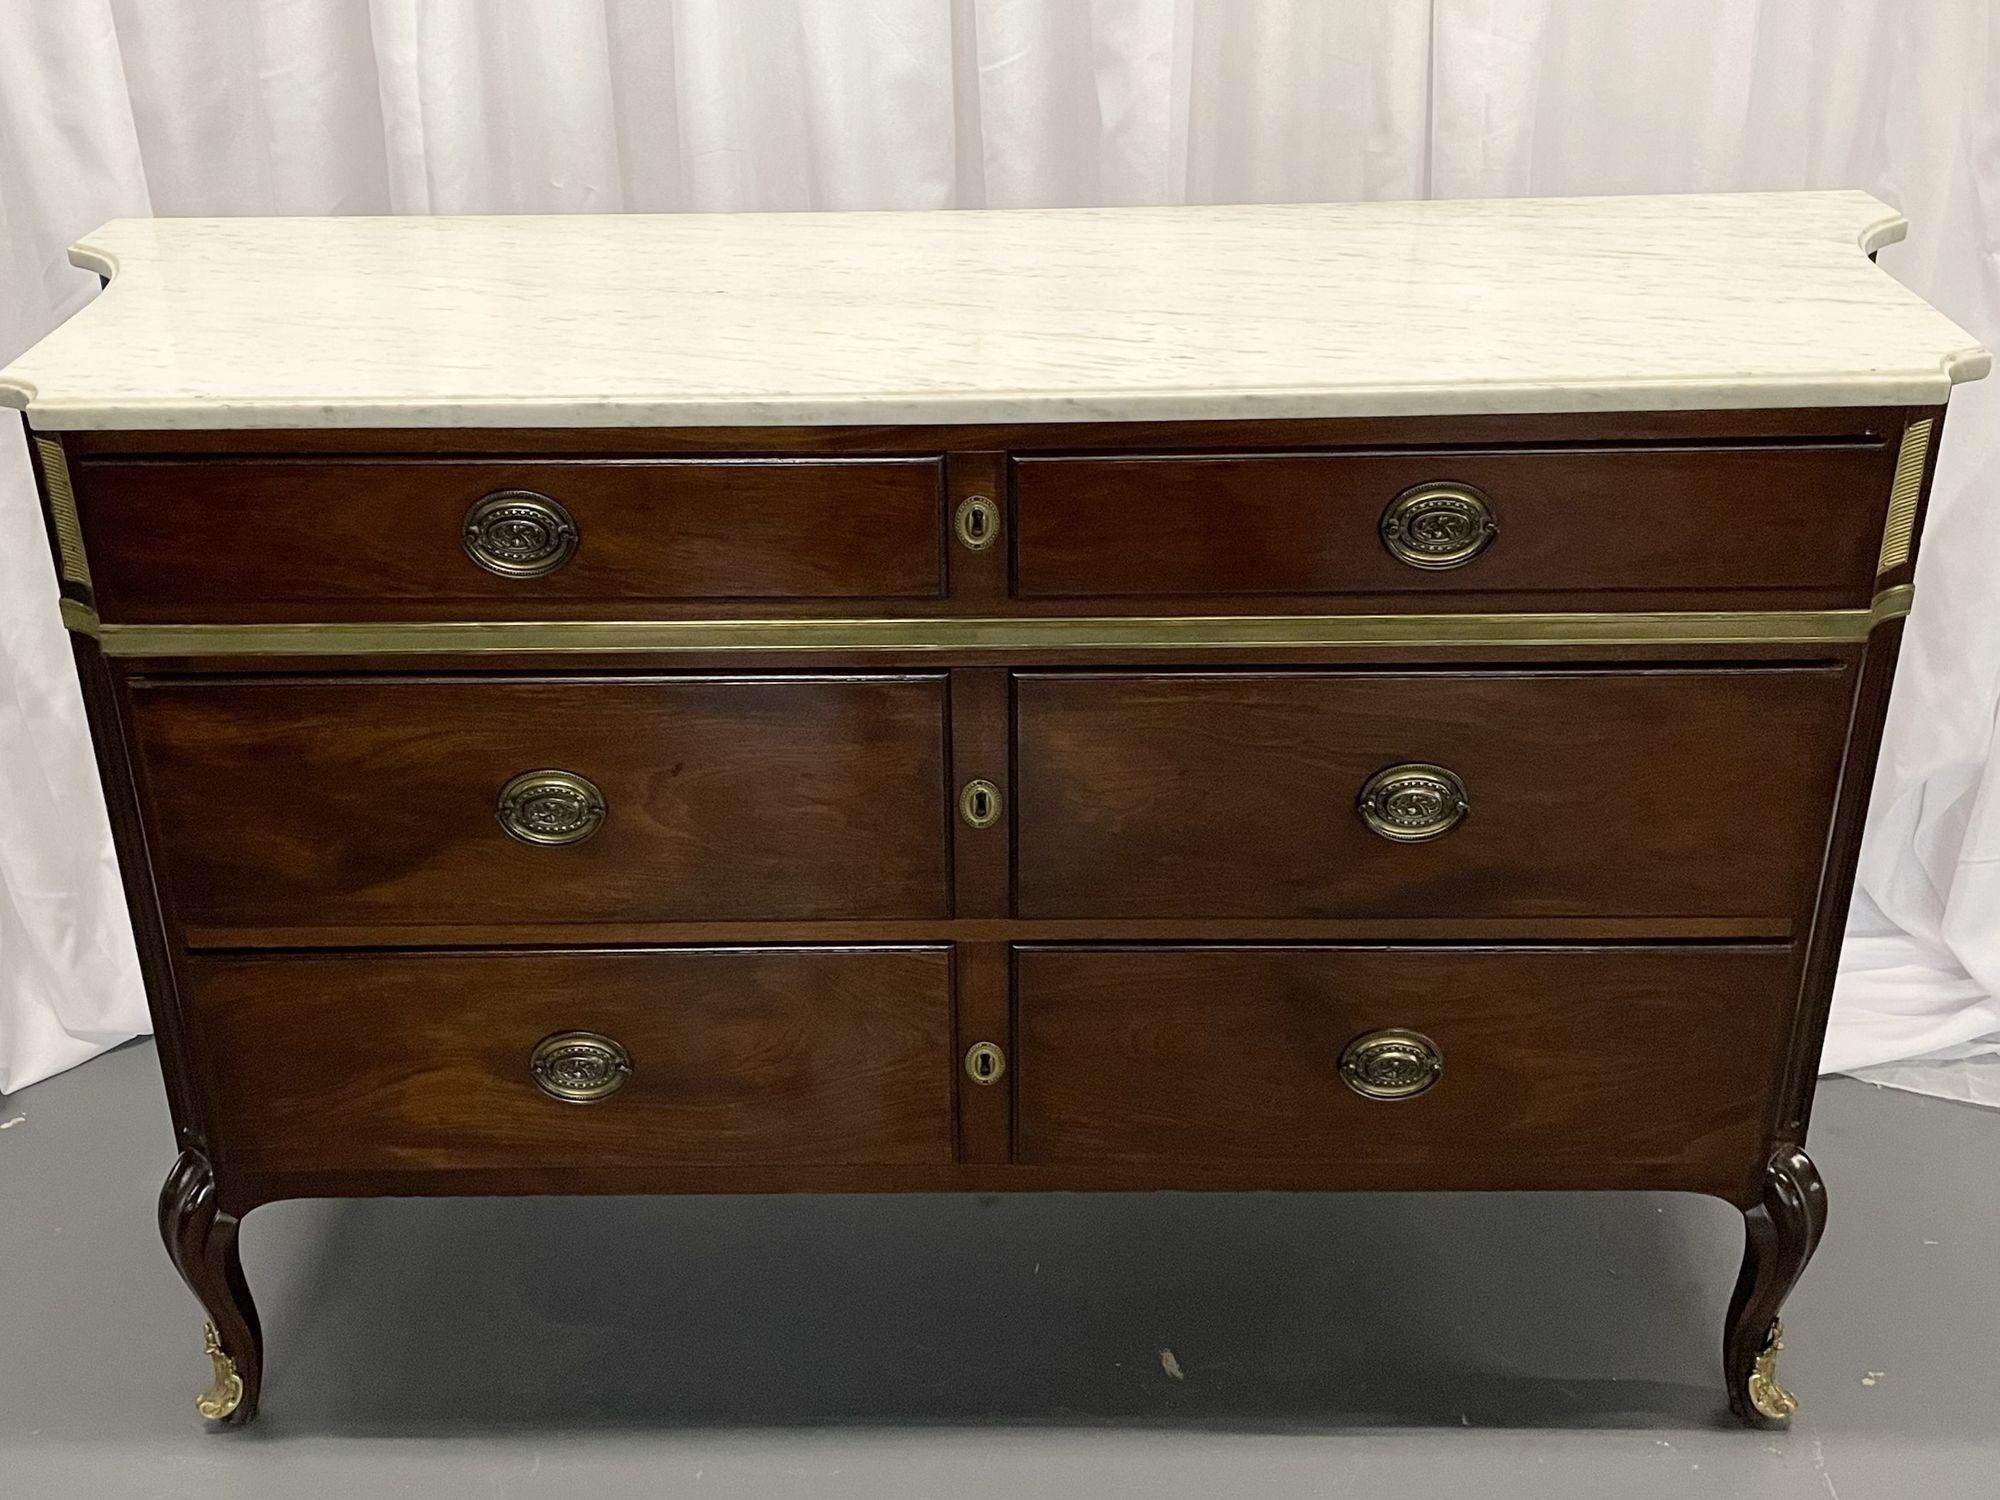 Maison Jansen Mahogany Commode or Chest, Bronze Mounted, Directoire Style, 1940s


A Jansen commode having two larger drawers under a smaller drawer with inverted sides and bronze mounts. The whole supporting a white and gray vein marble top. This